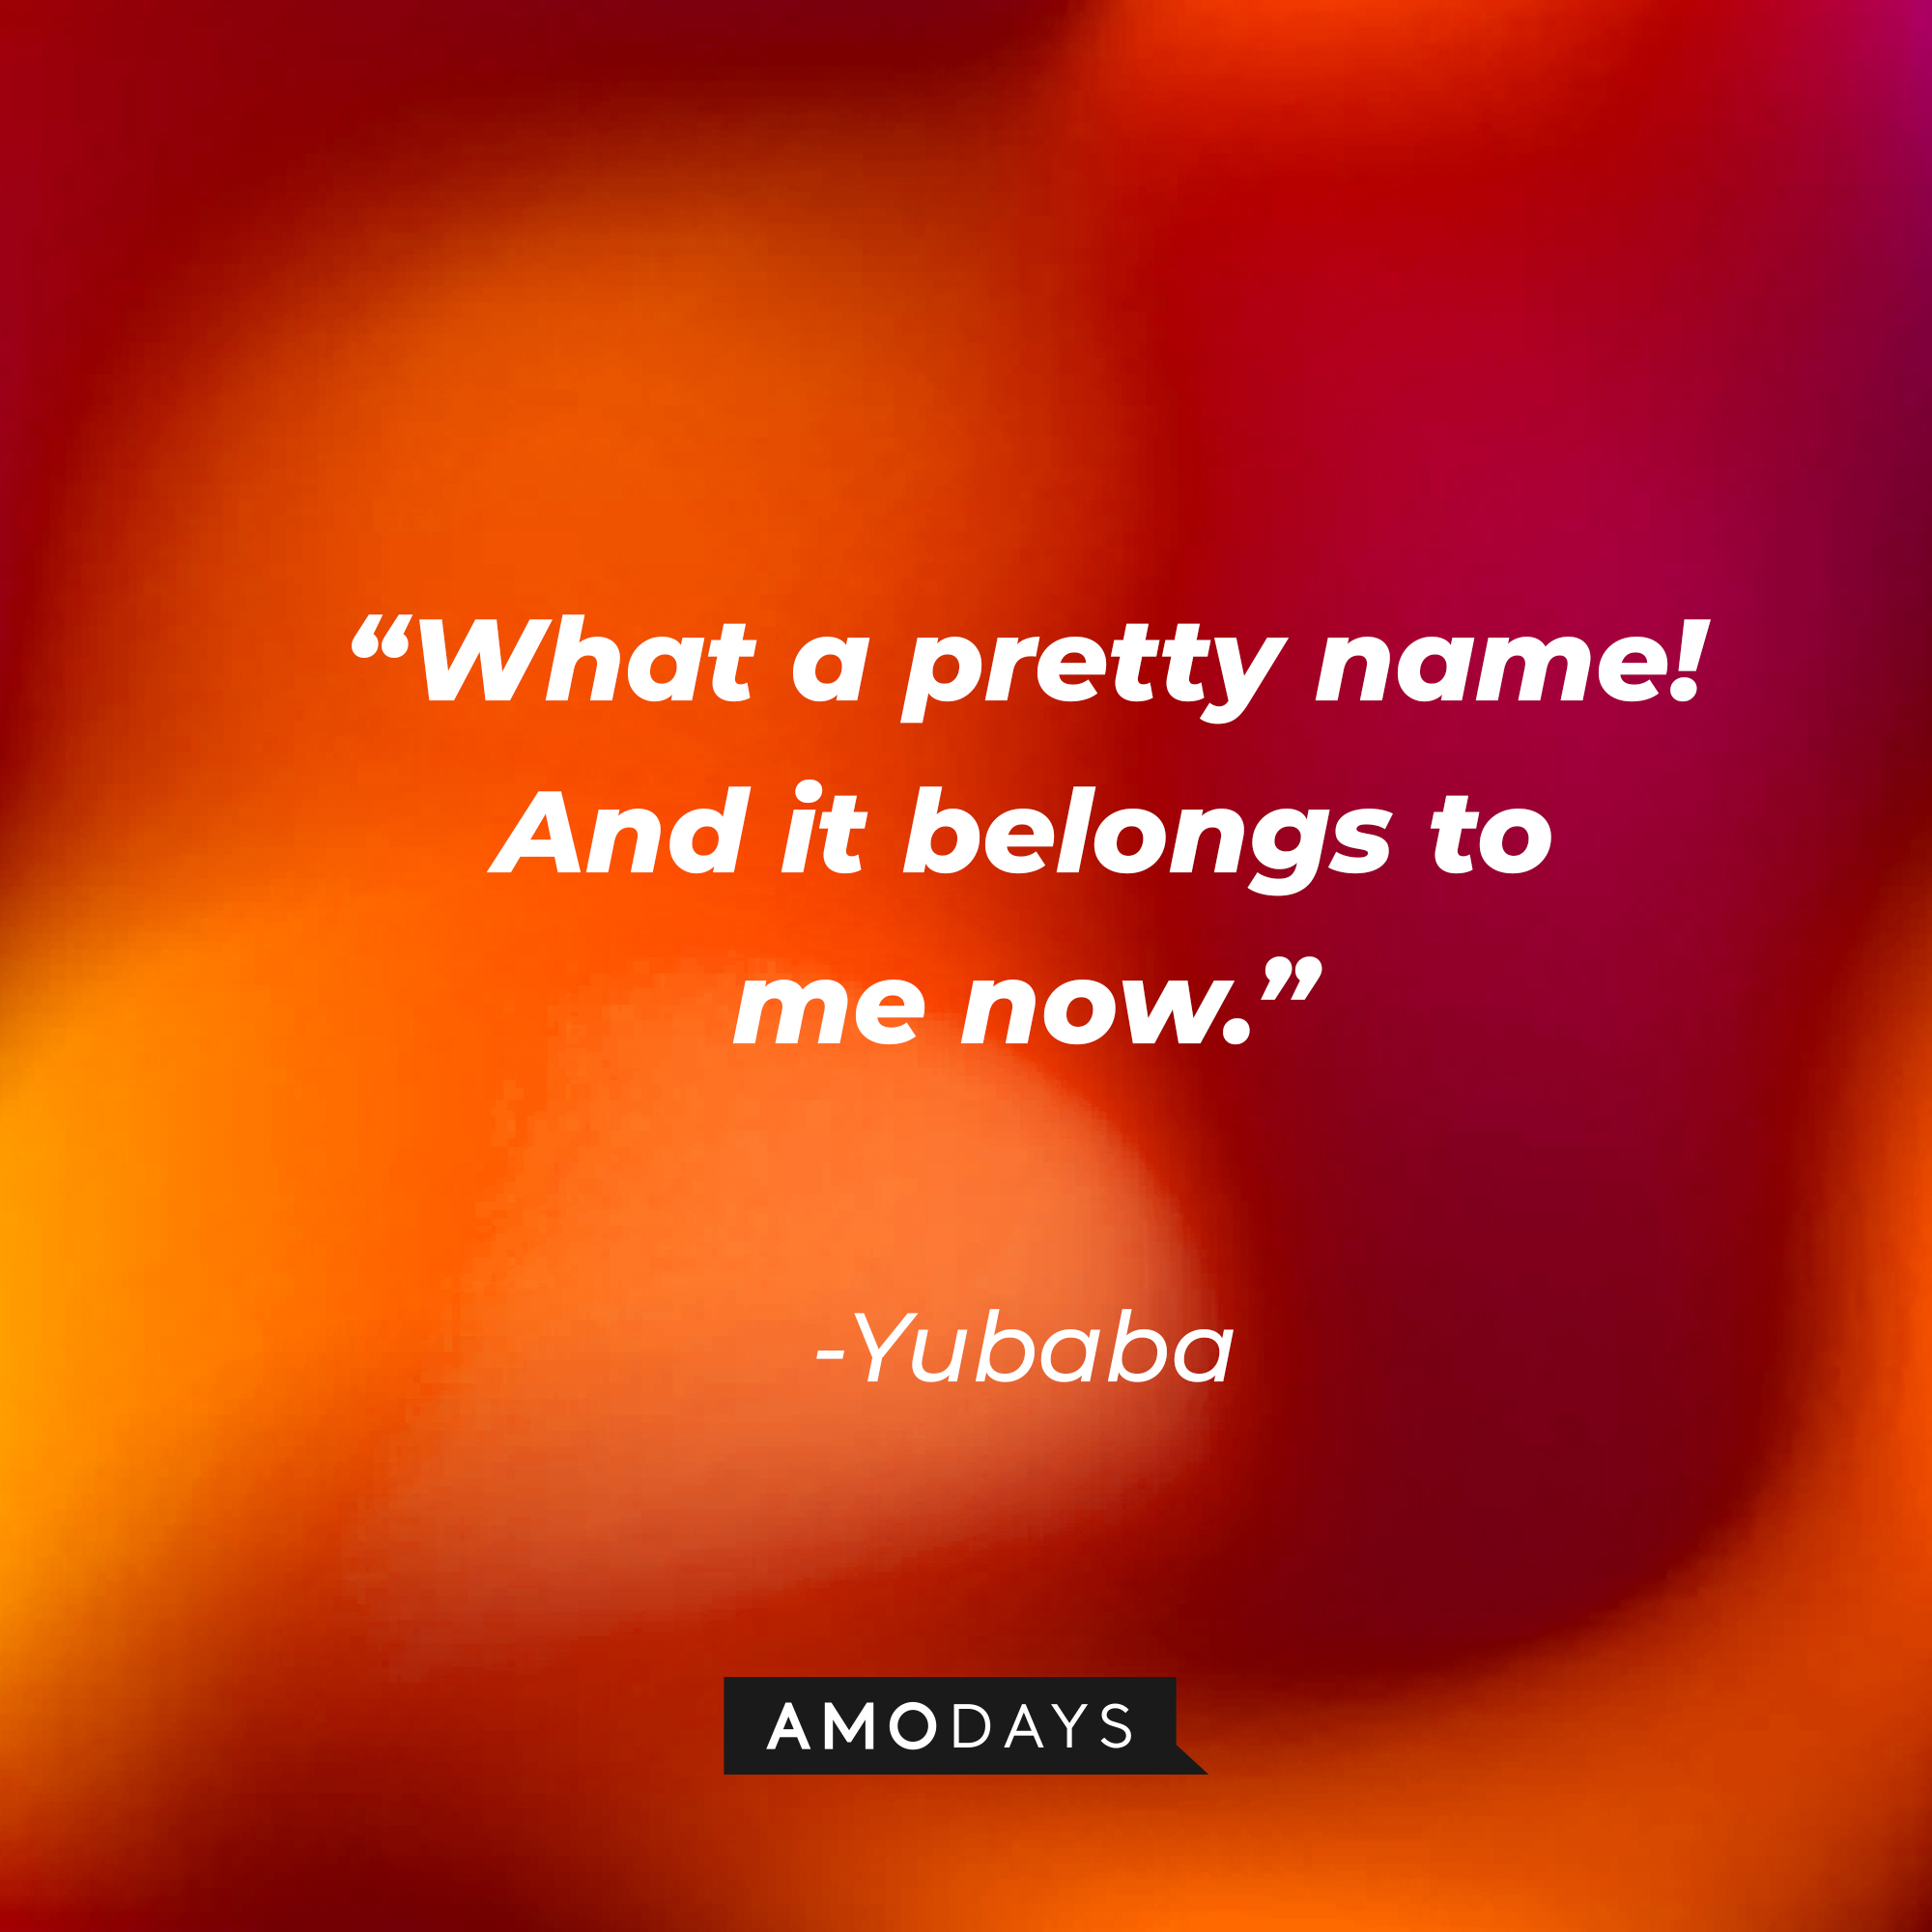 Yubaba’s quote: "What a pretty name! And it belongs to me now.” | Source: AmoDays